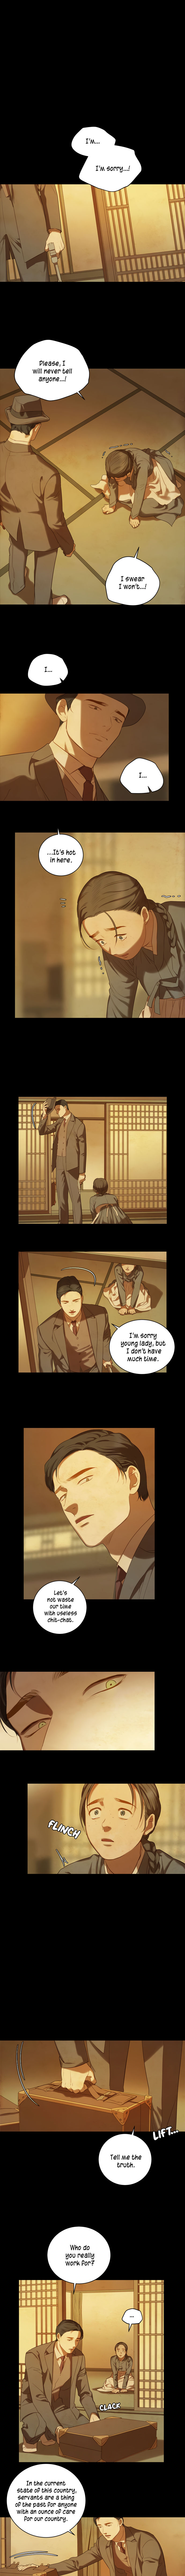 Gorae Byul - The Gyeongseong Mermaid - Chapter 8 Page 1